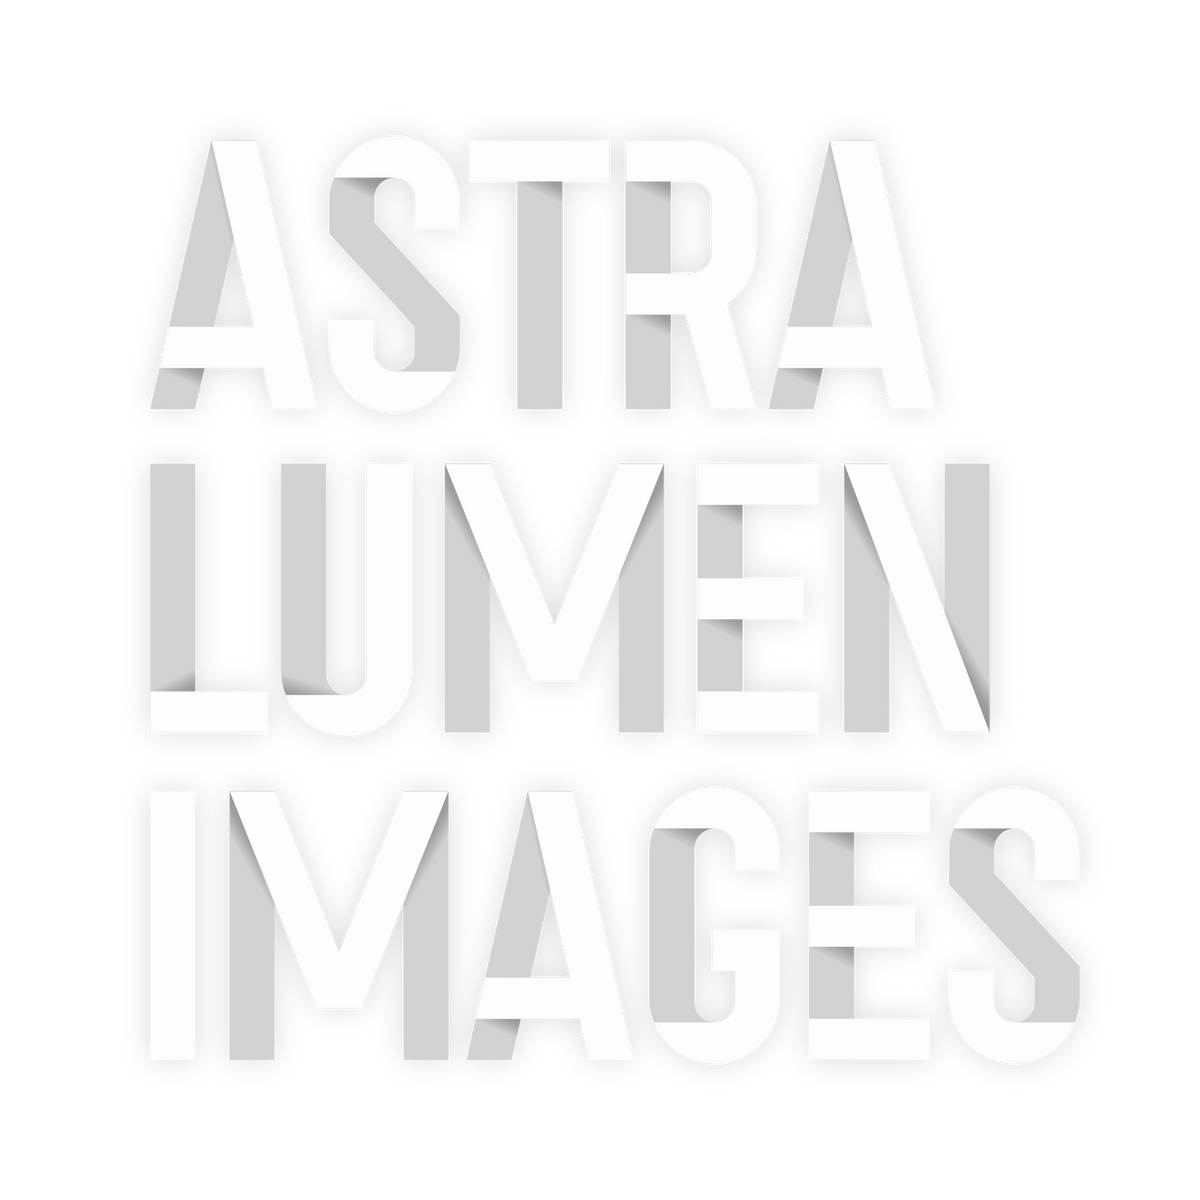 Astra Lumen Images logo, all text